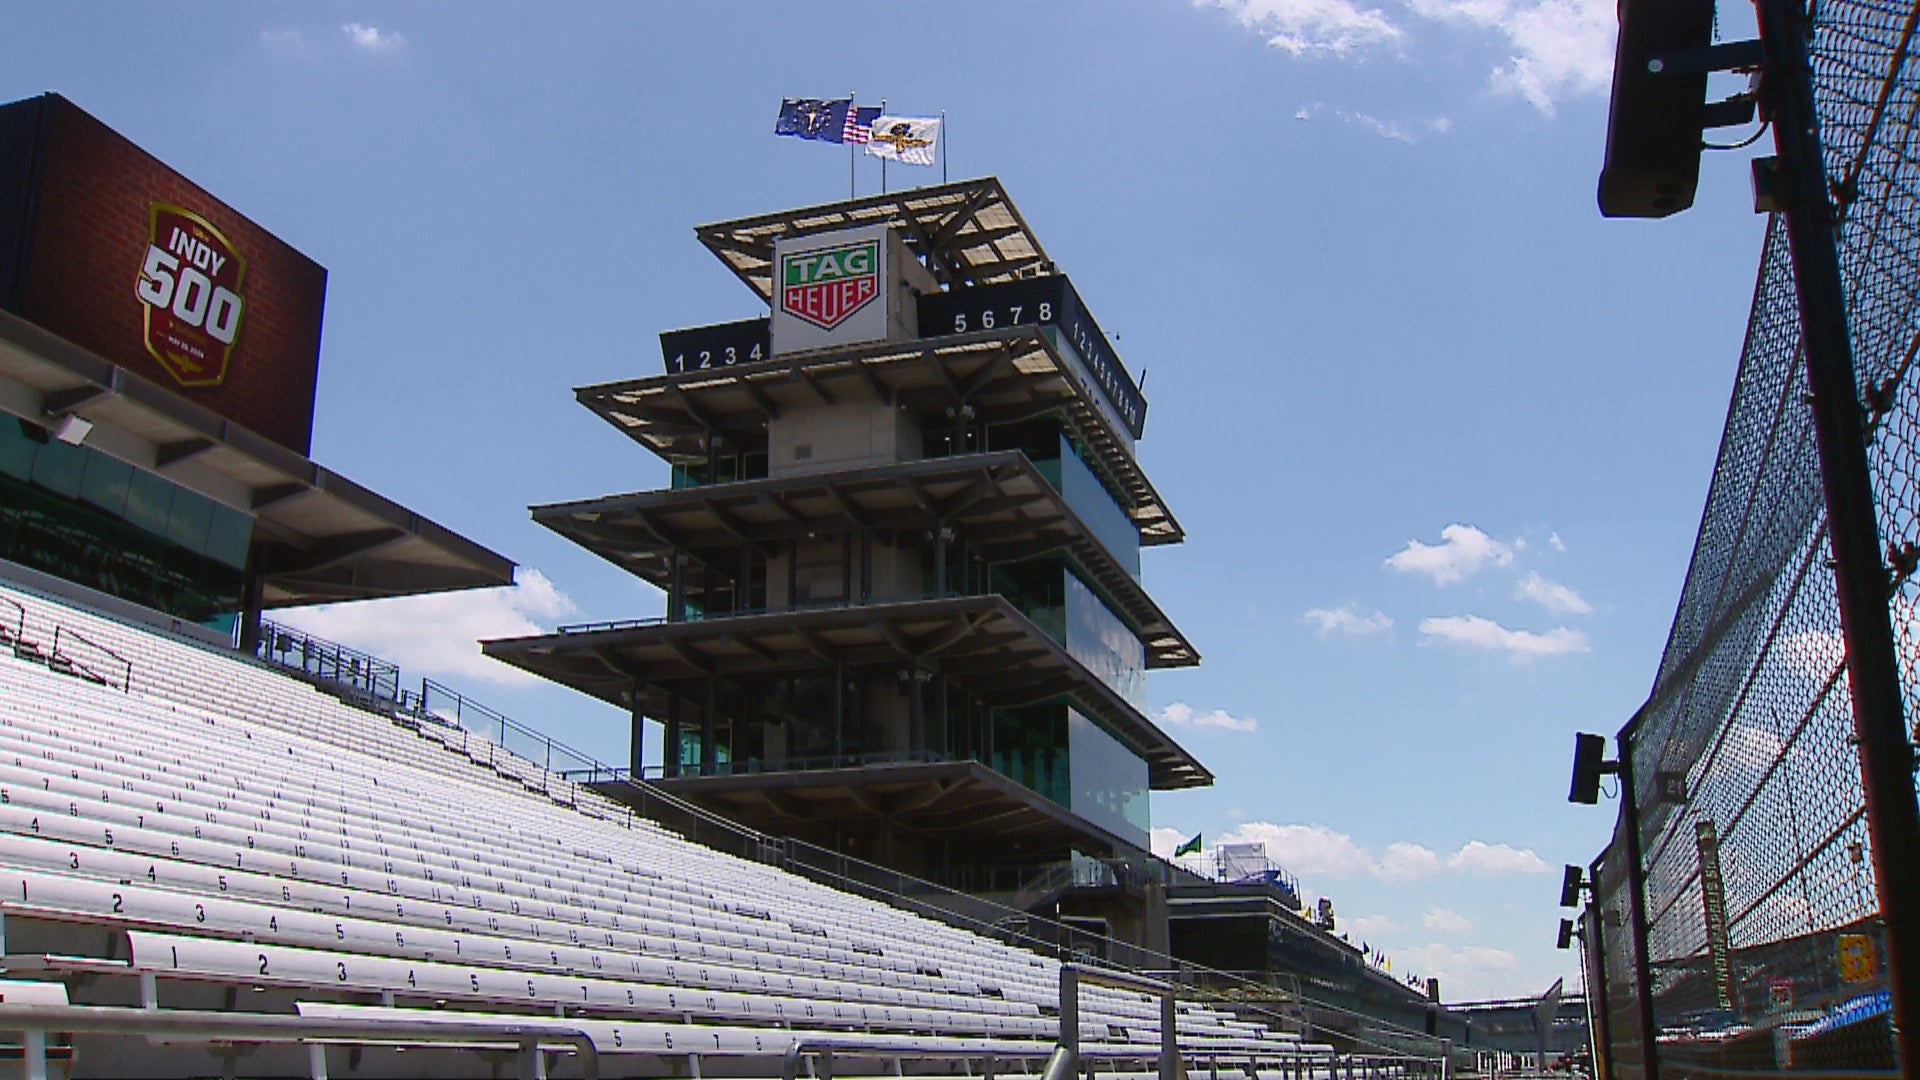 Your guide for planning to go to the Indianapolis 500